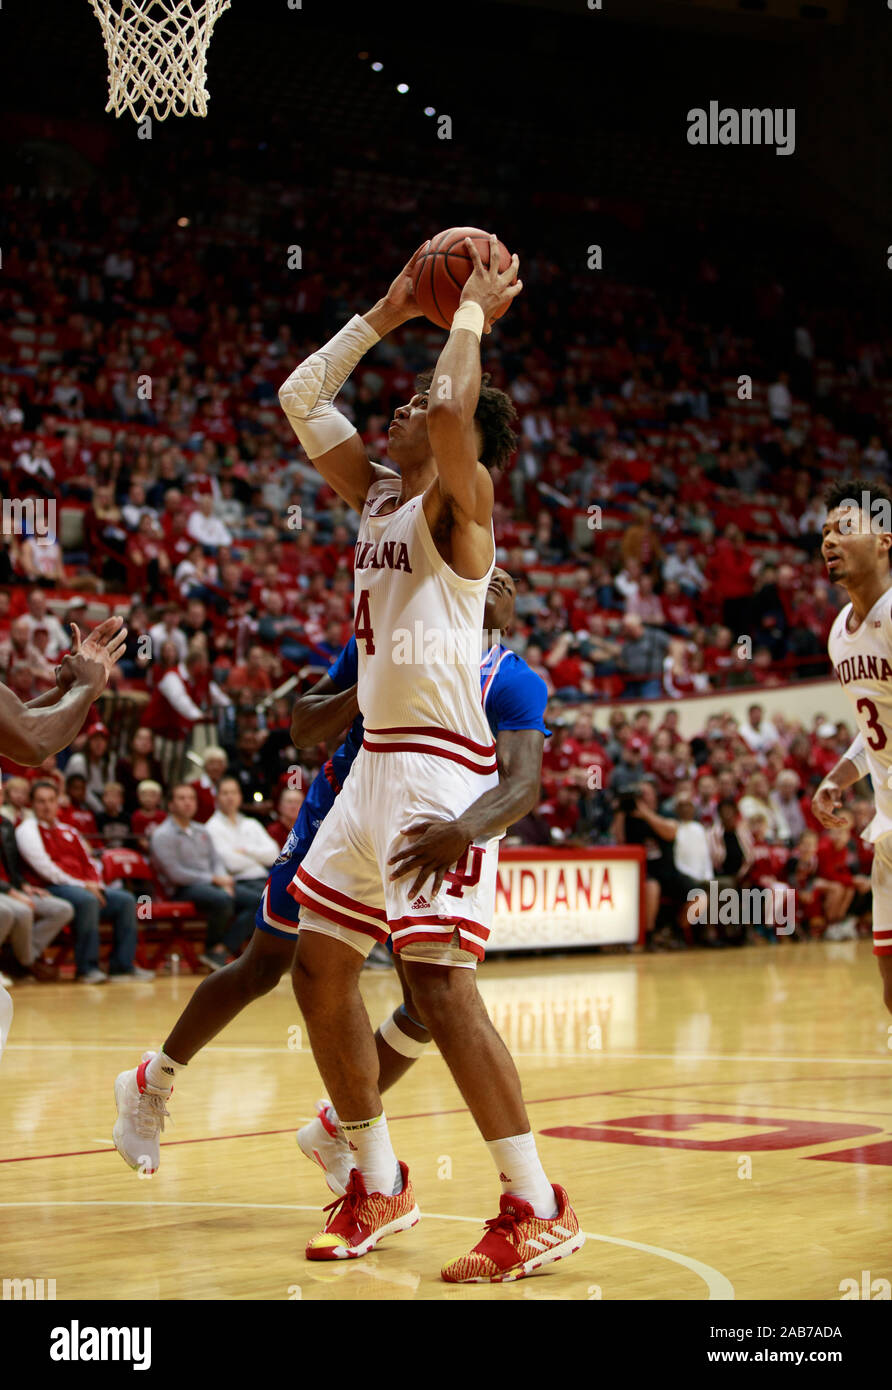 Indiana University's Trayce Jackson-Davis plays against Louisiana Tech during an NCAA college basketball game at IU's Assembly Hall in Bloomington.The Hoosiers beat the Bulldogs 88 to 75. Stock Photo